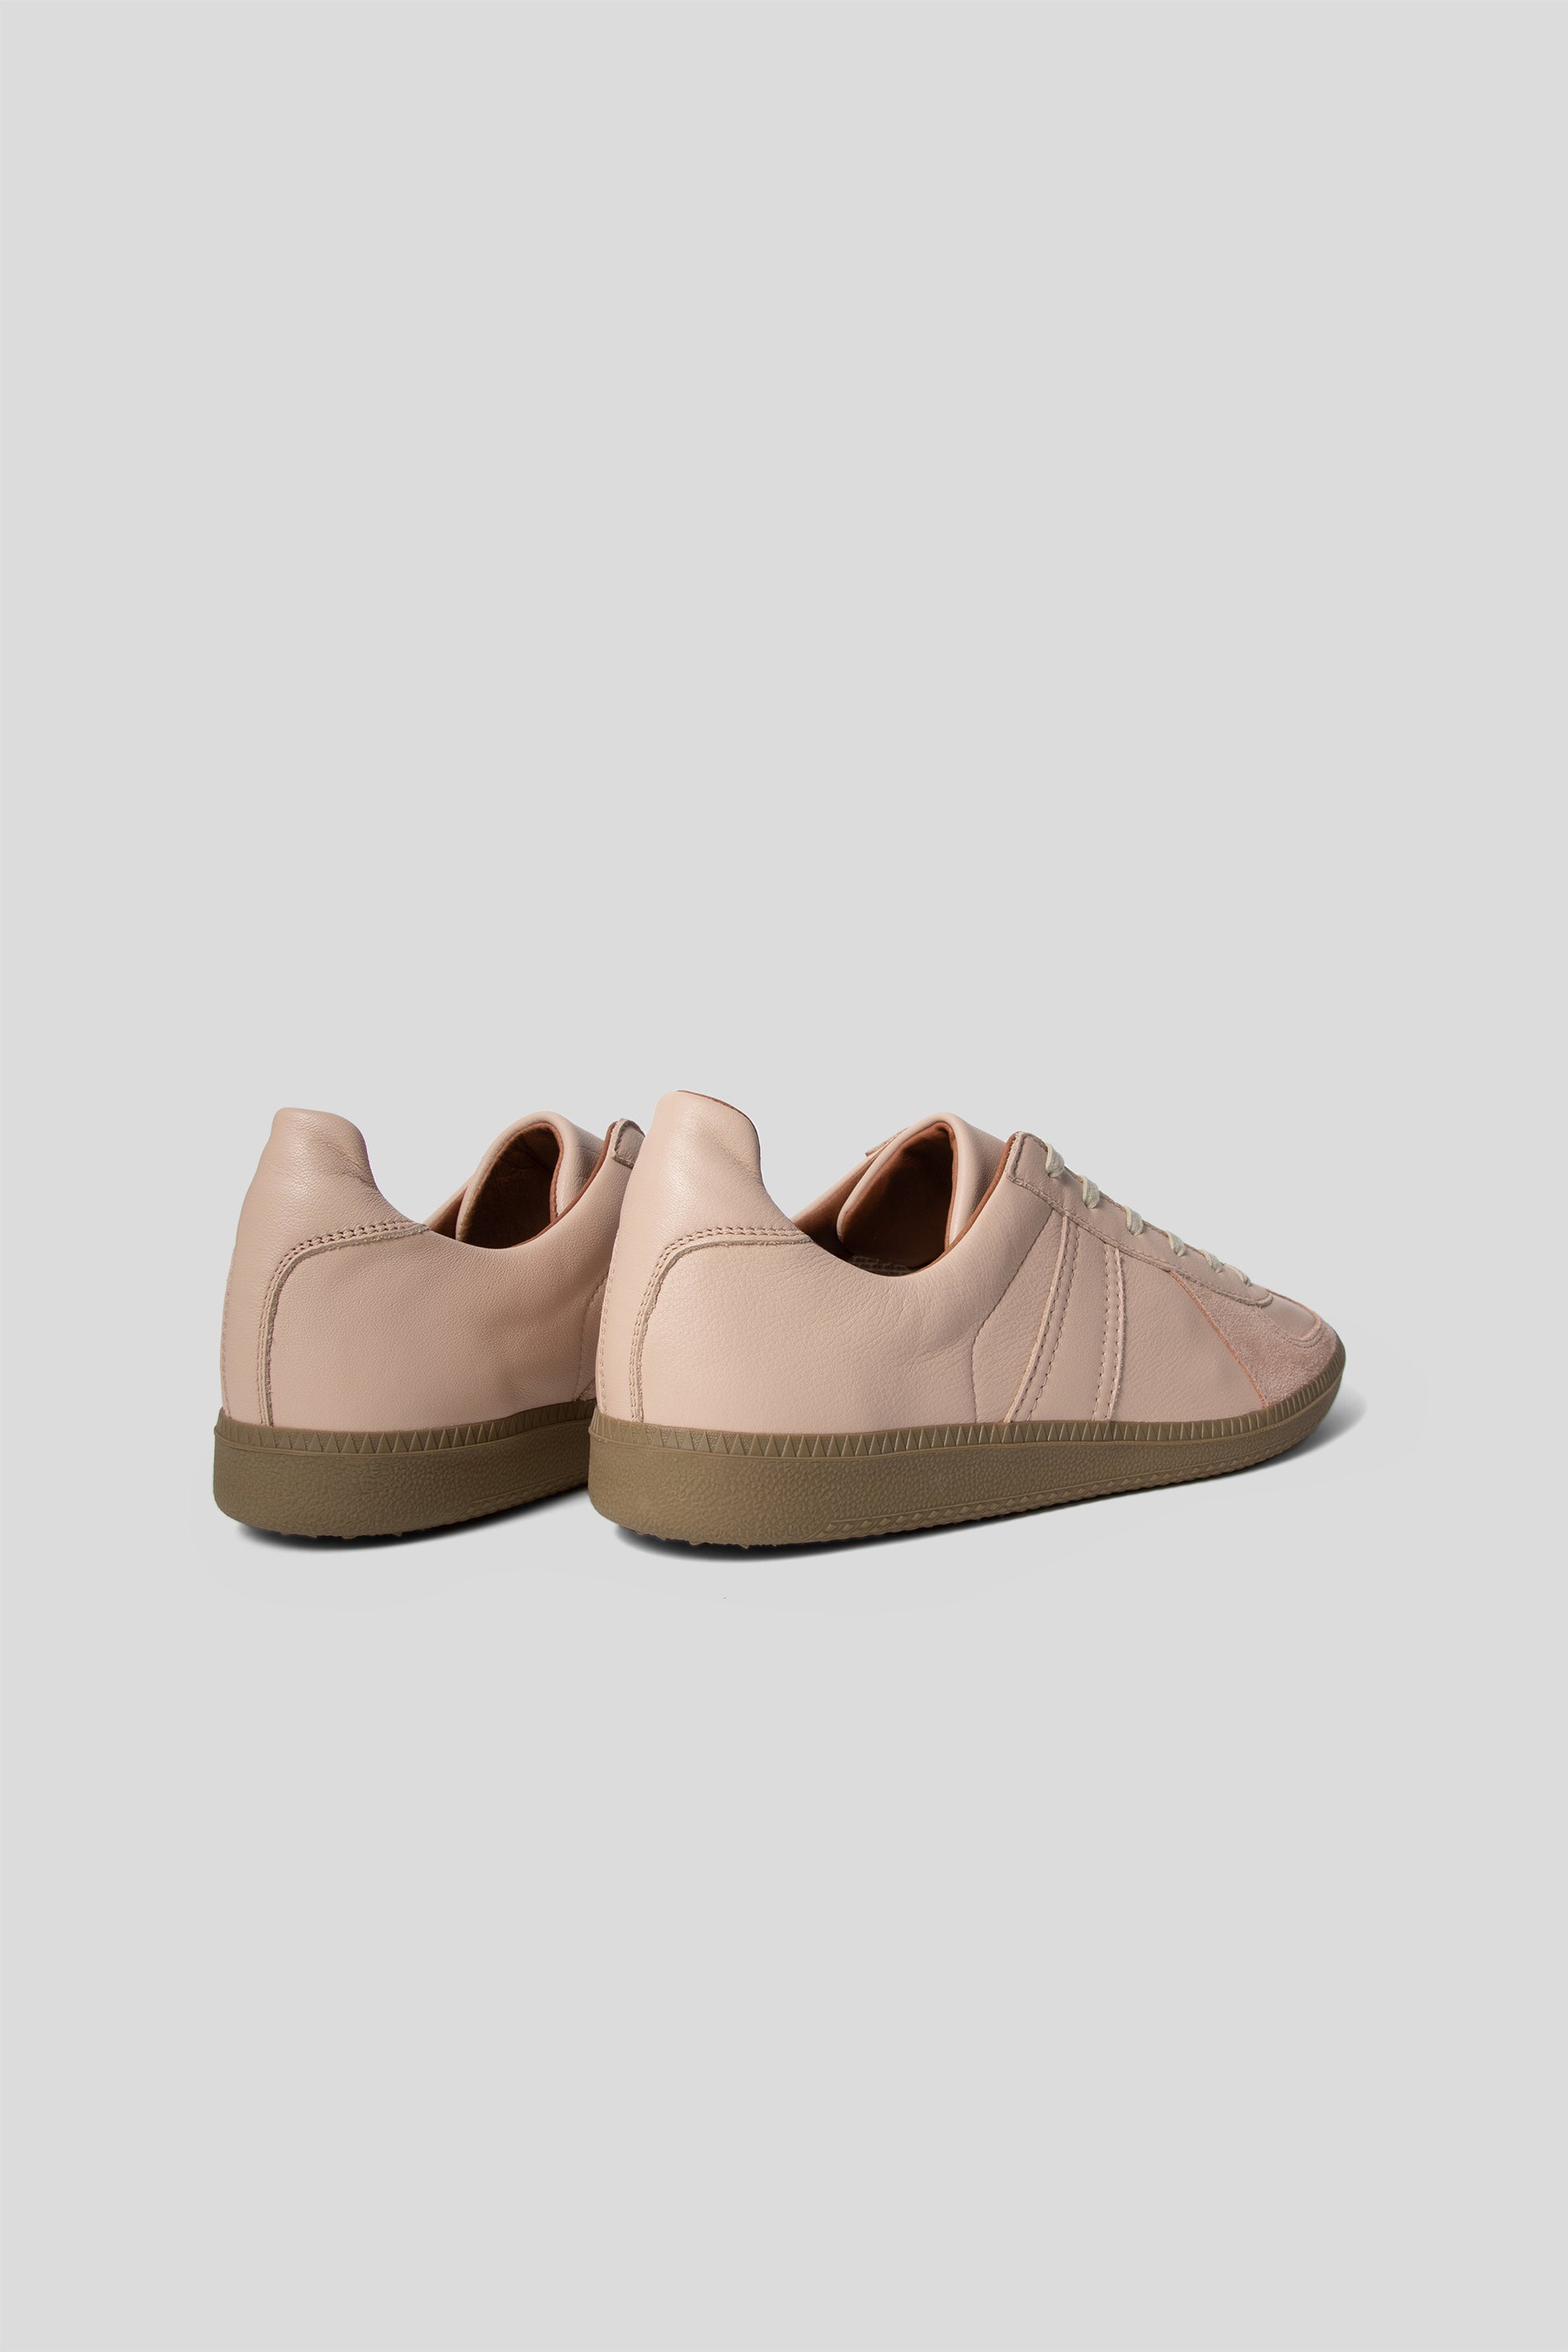 Reproduction of Found WMNS German Military Trainer Shoe in Nude